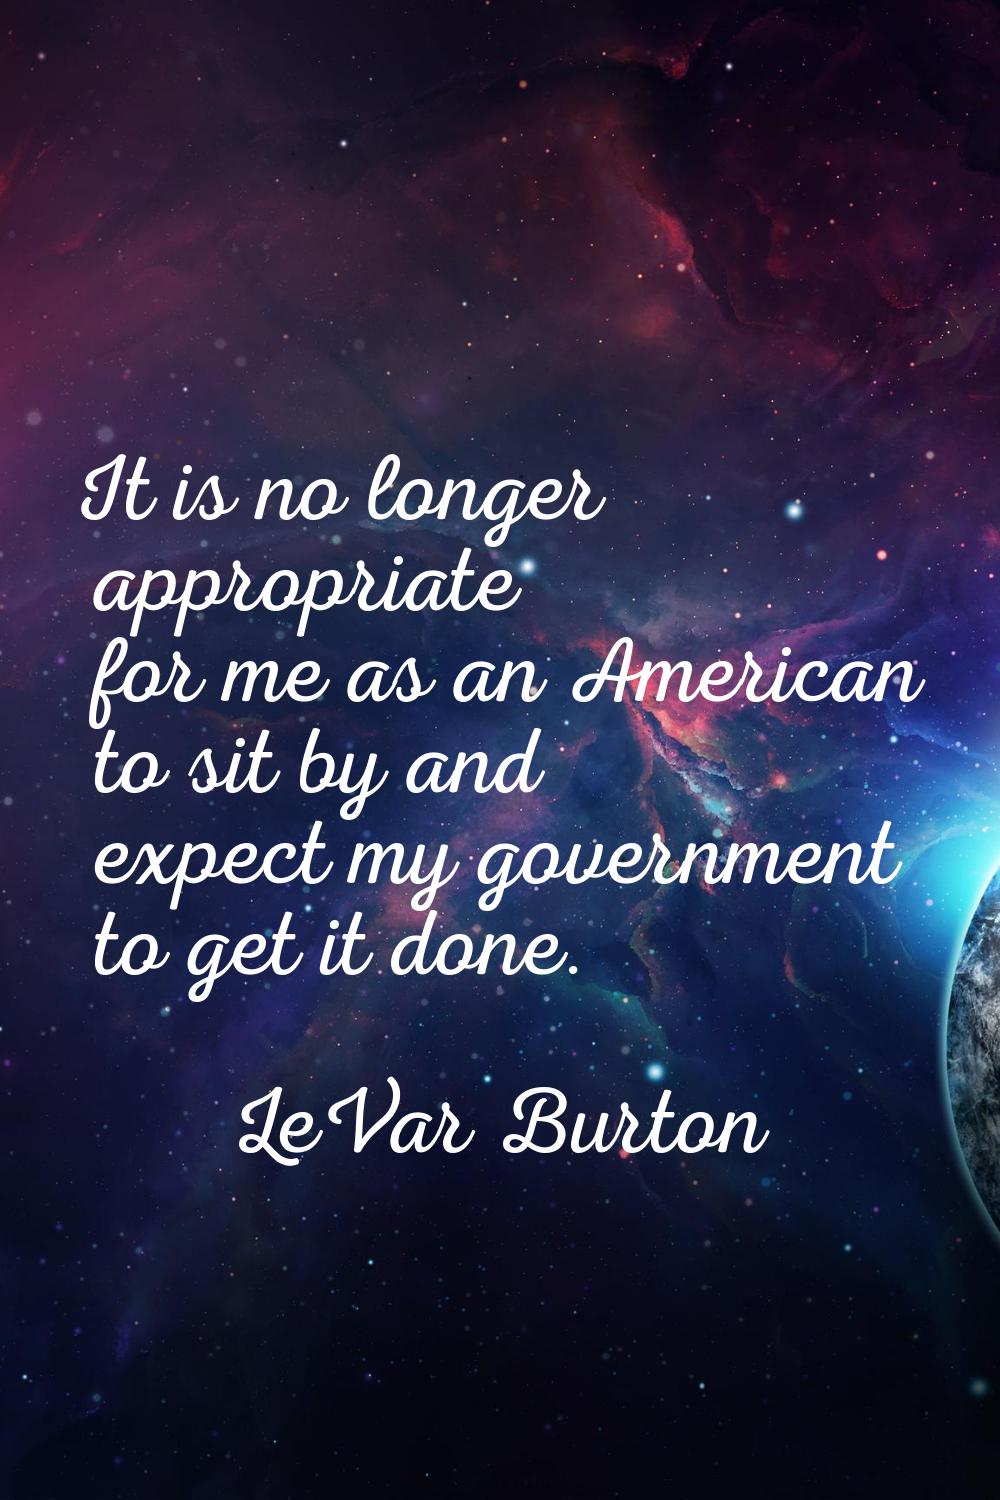 It is no longer appropriate for me as an American to sit by and expect my government to get it done